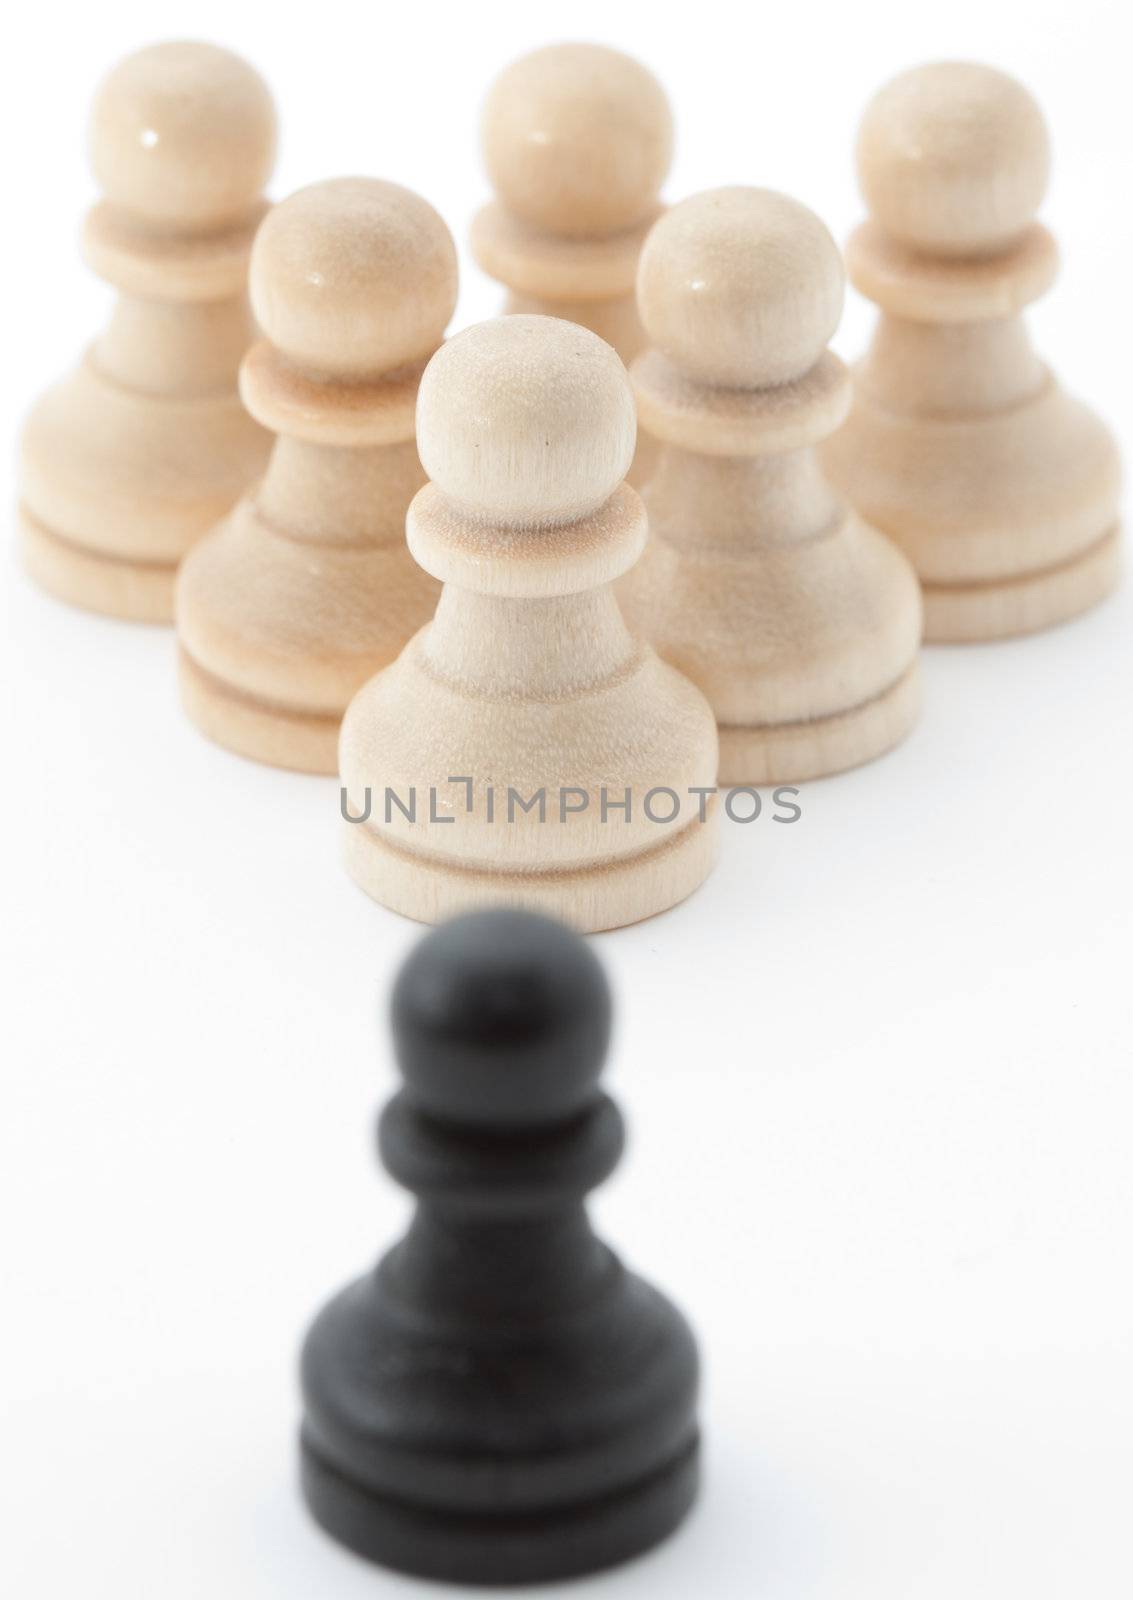 Pawns in two different colors. Symbolizing a community and an outsider